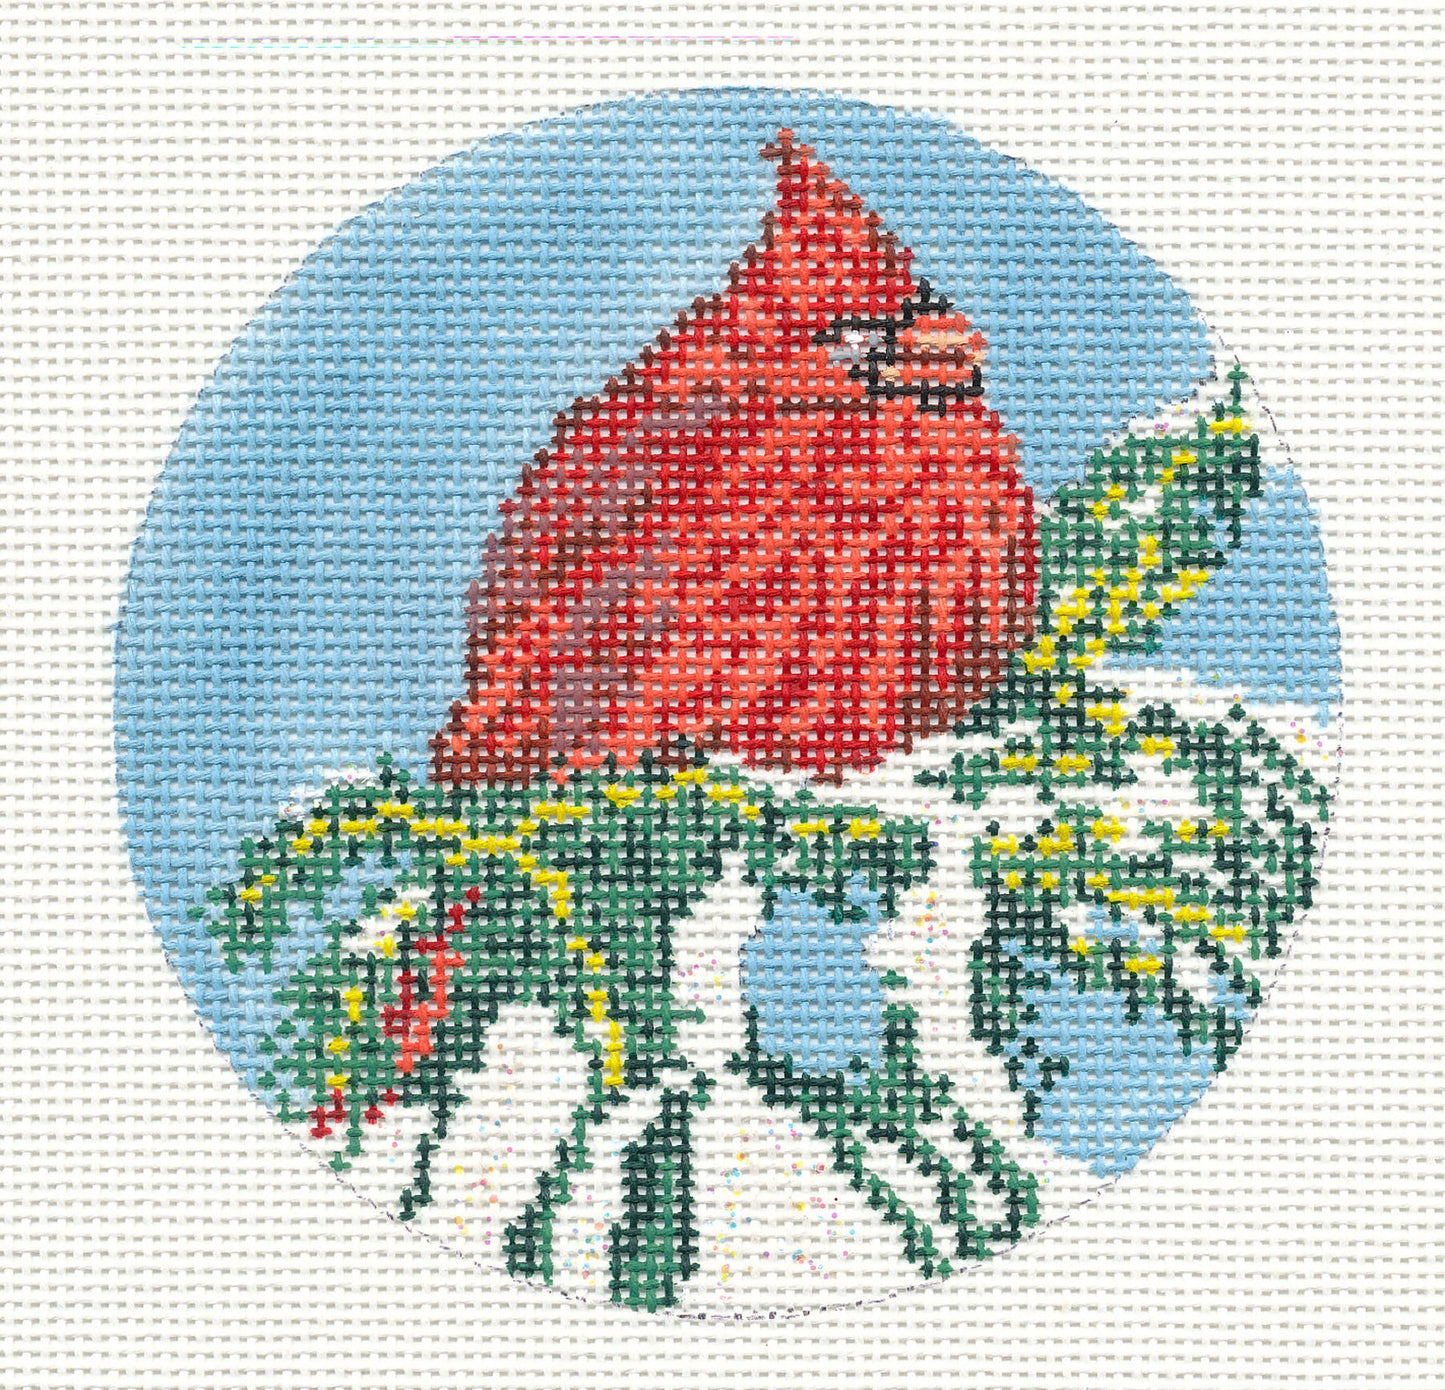 Bird Round ~ Red Cardinal Bird 4" Ornament handpainted Needlepoint Canvas by Needle Crossings